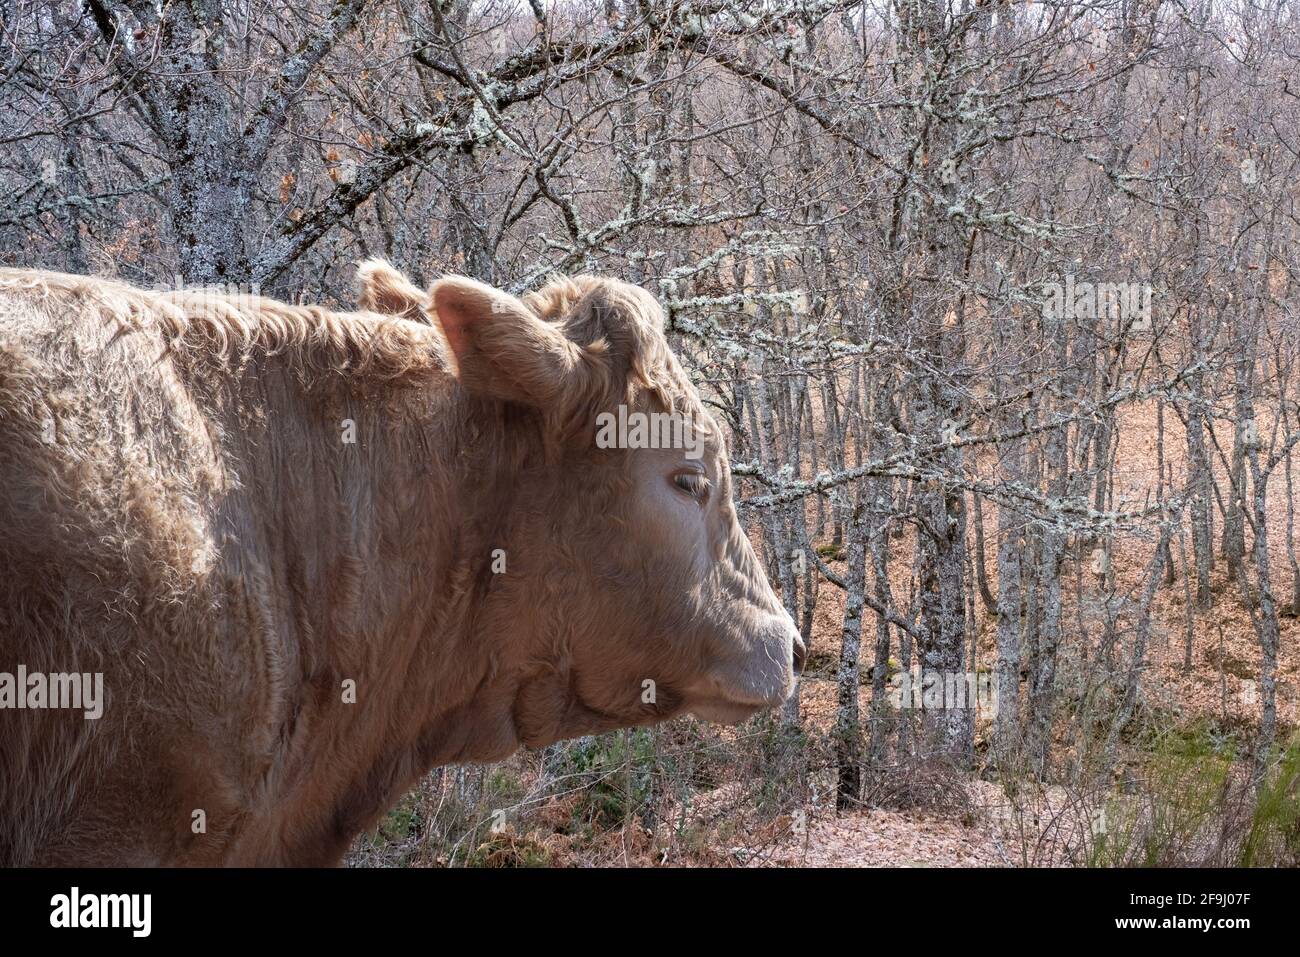 A beige-haired calf walking through the trees and looking at us out of the corner of his eye Stock Photo